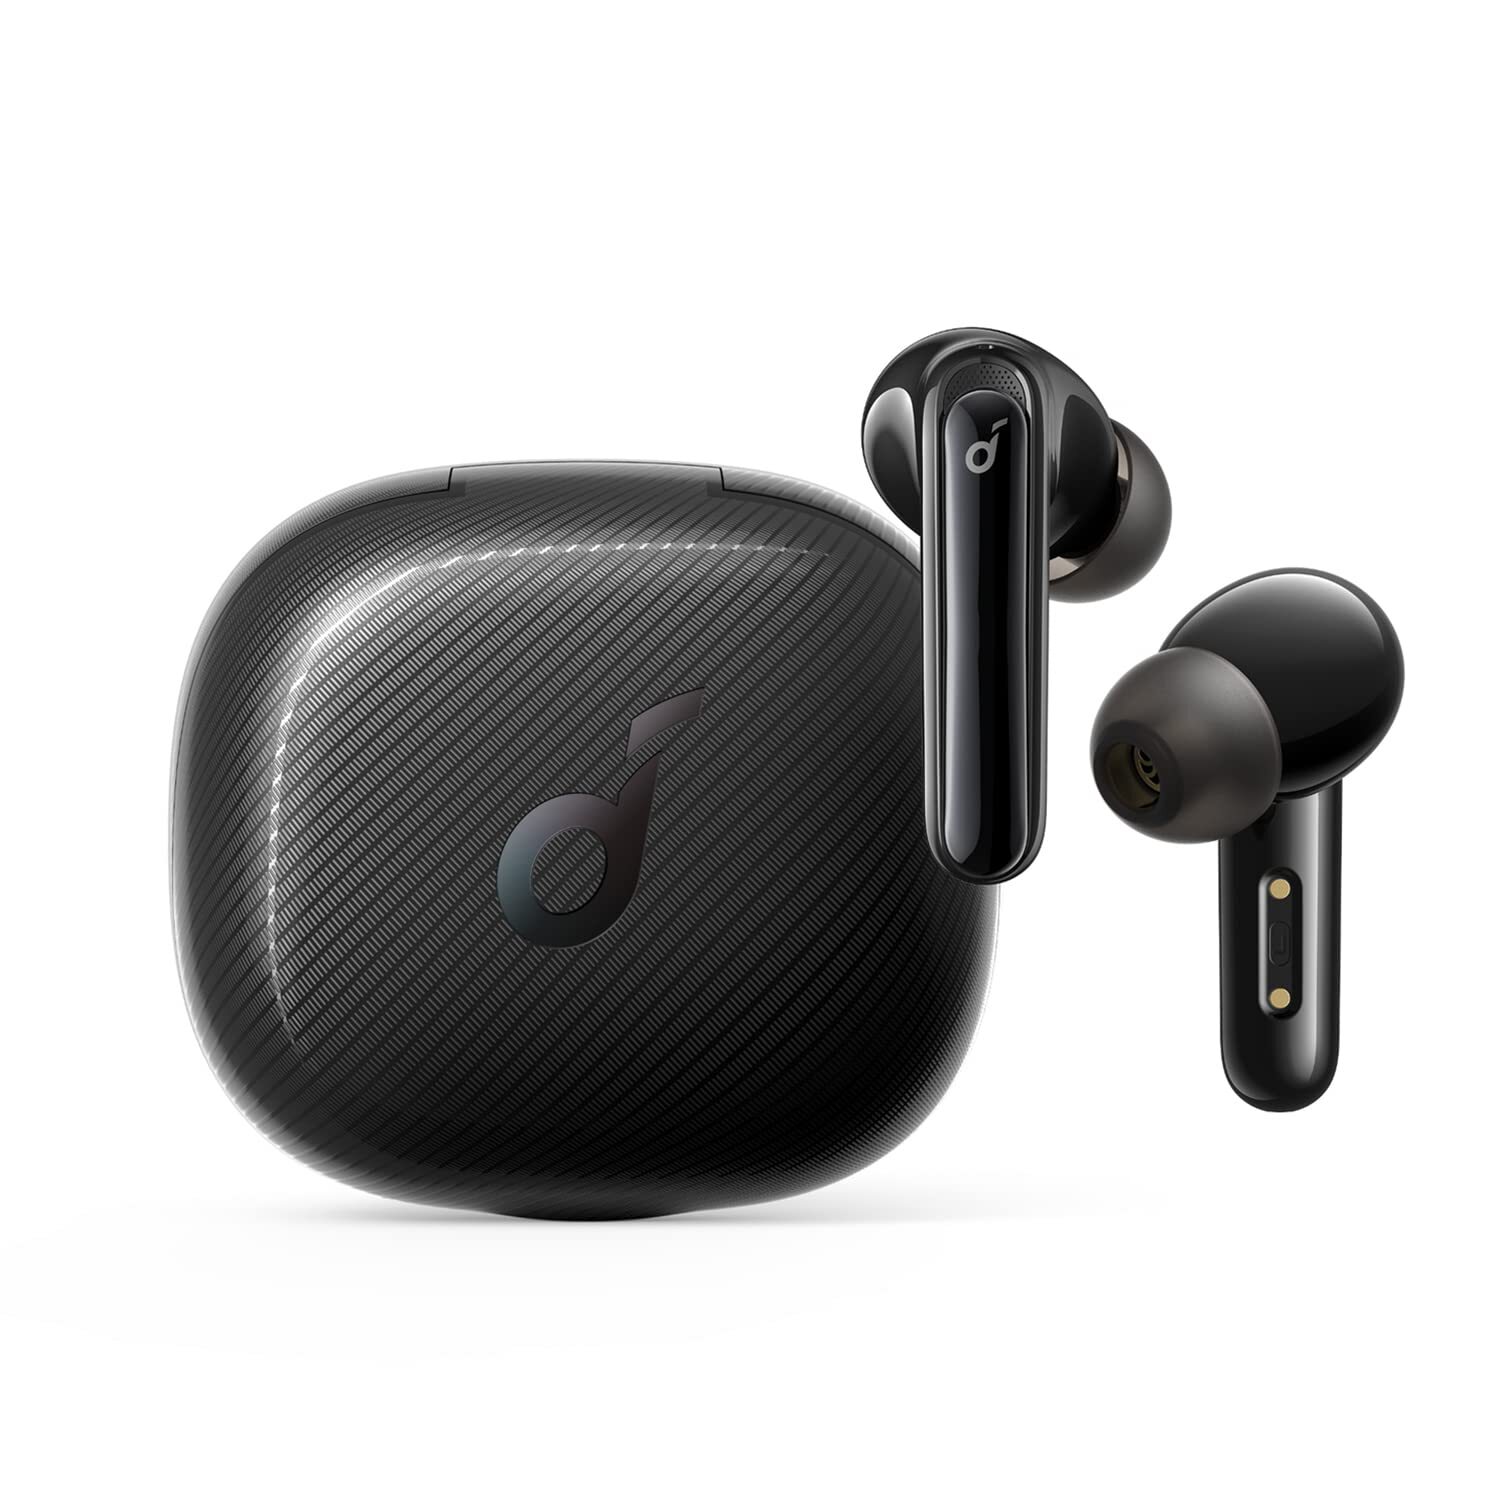 Anker Soundcore Life Note 3 Black True Wireless (TWS) Earbuds with Multi Mode Active Noise Cancelling, Thumping Sound, 6 Mics for Clear Calls, 35H Playtime, IPX5 Waterproof, Wireless Earbuds